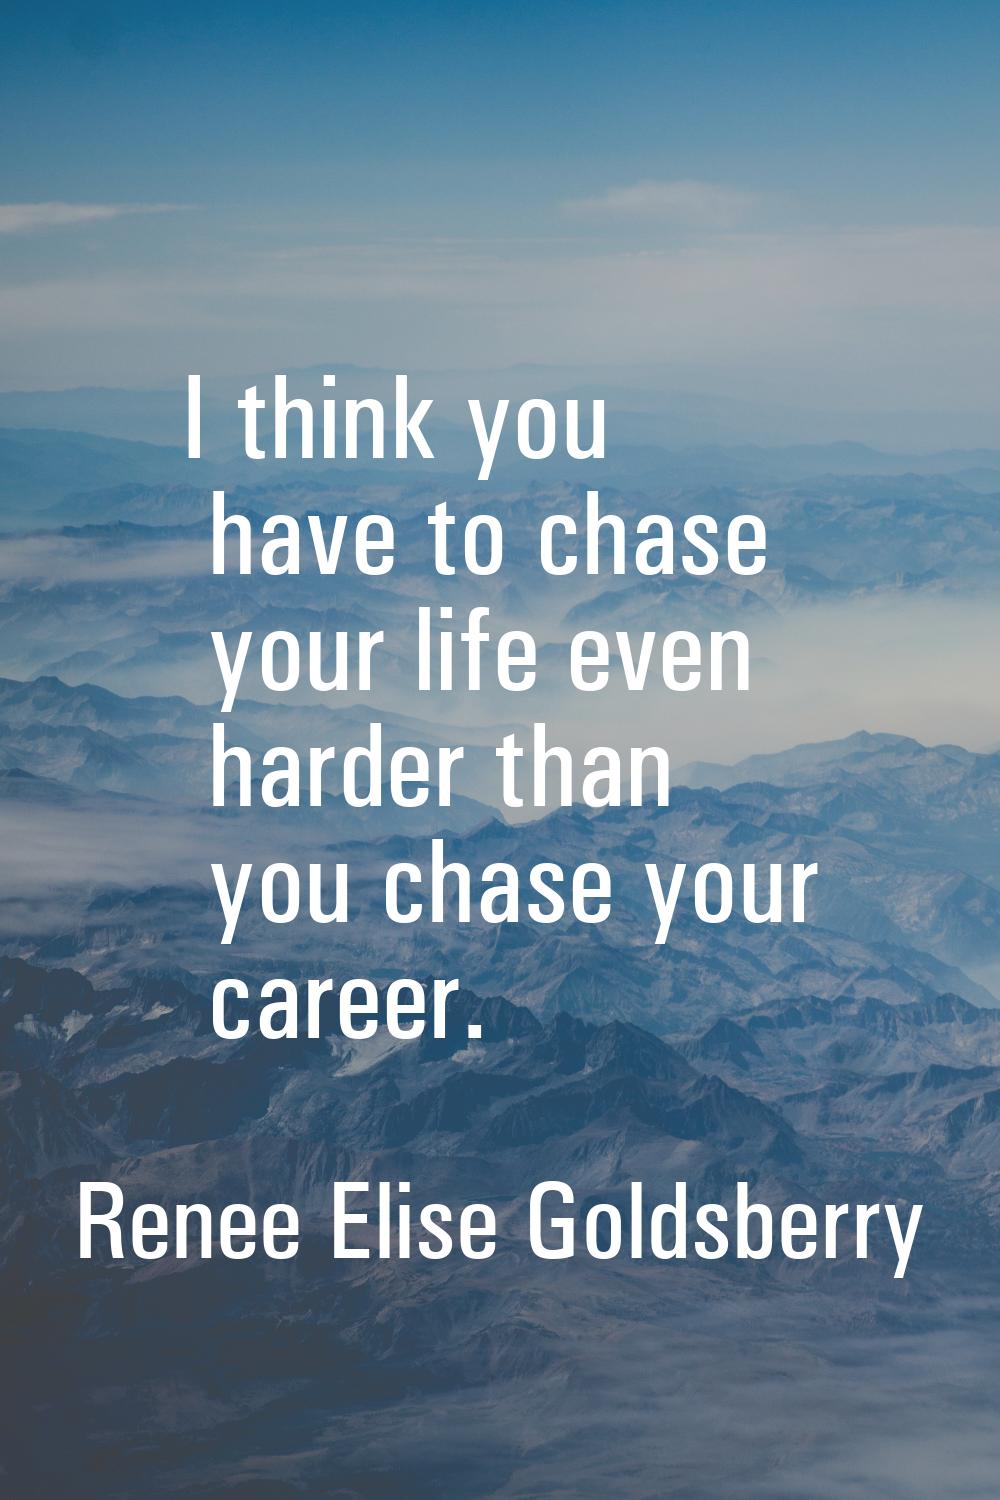 I think you have to chase your life even harder than you chase your career.